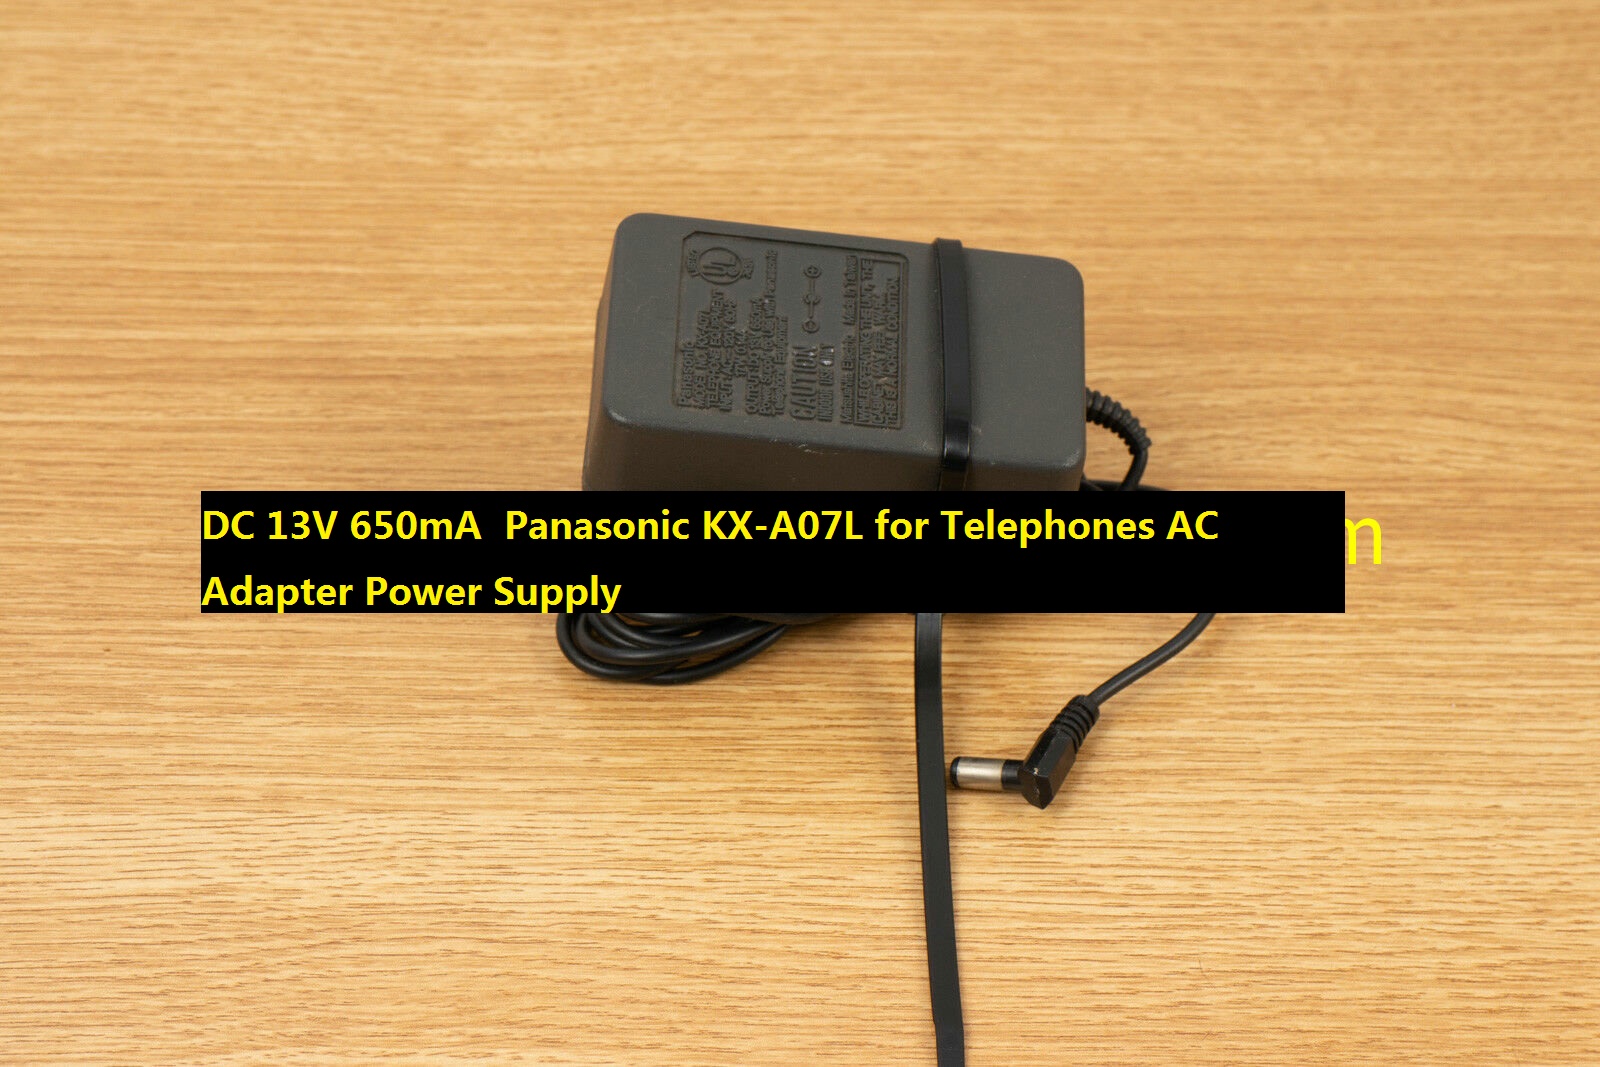 *100% Brand NEW* Panasonic KX-A07L for Telephones DC 13V 650mA AC Adapter Power Supply